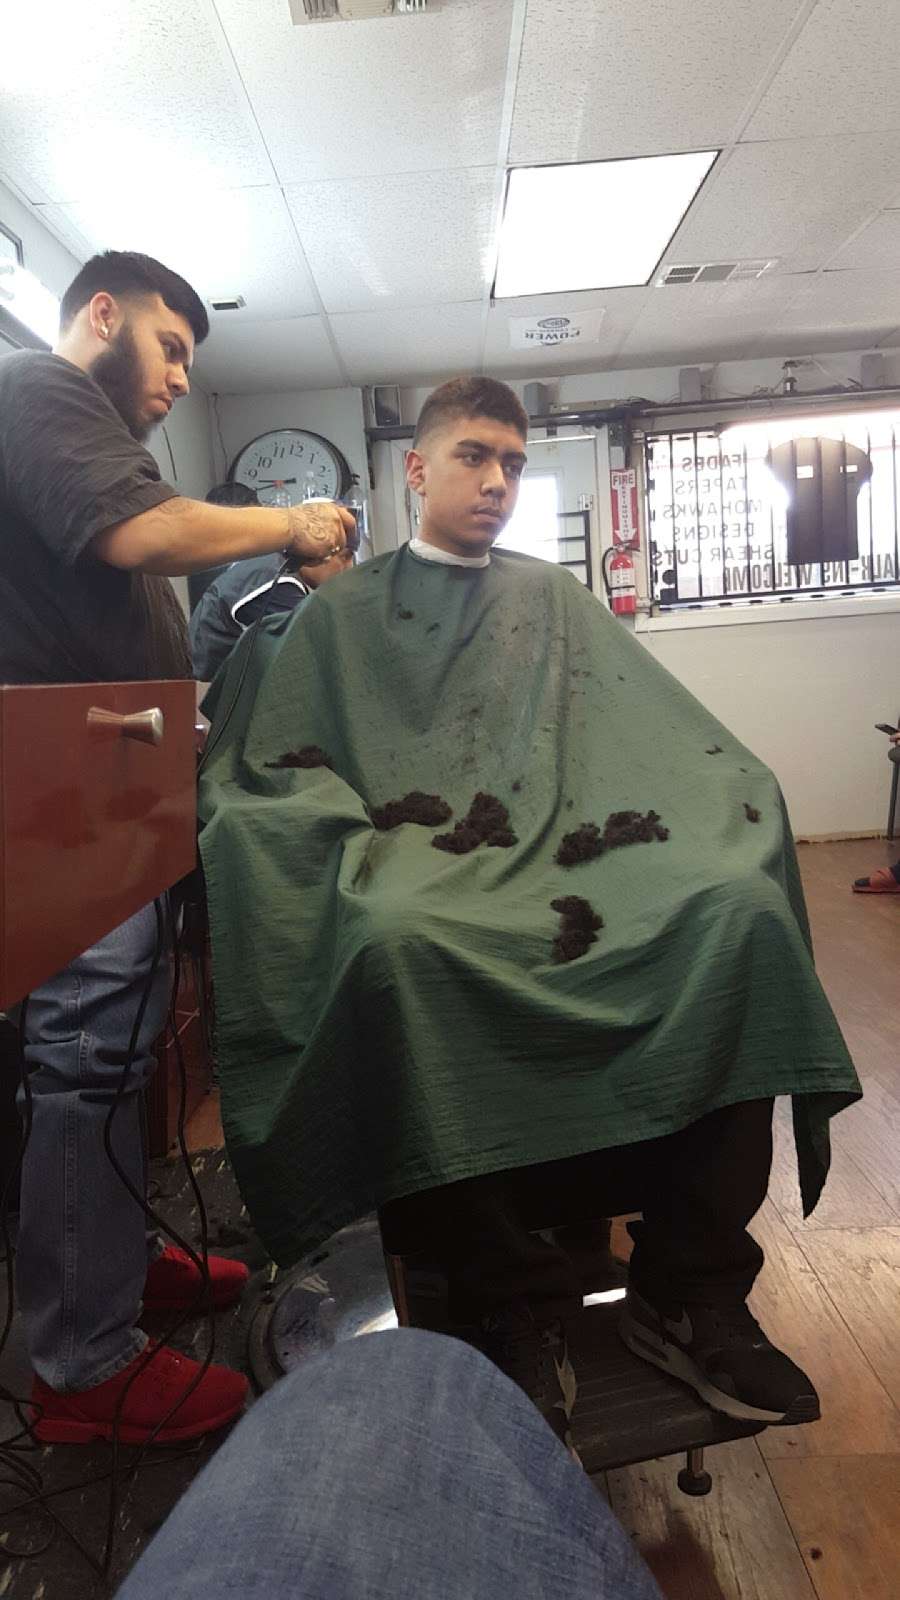 Gs Barber Shop | Photo 3 of 10 | Address: 5220 Gus Thomasson Rd, Mesquite, TX 75150, USA | Phone: (469) 767-3419